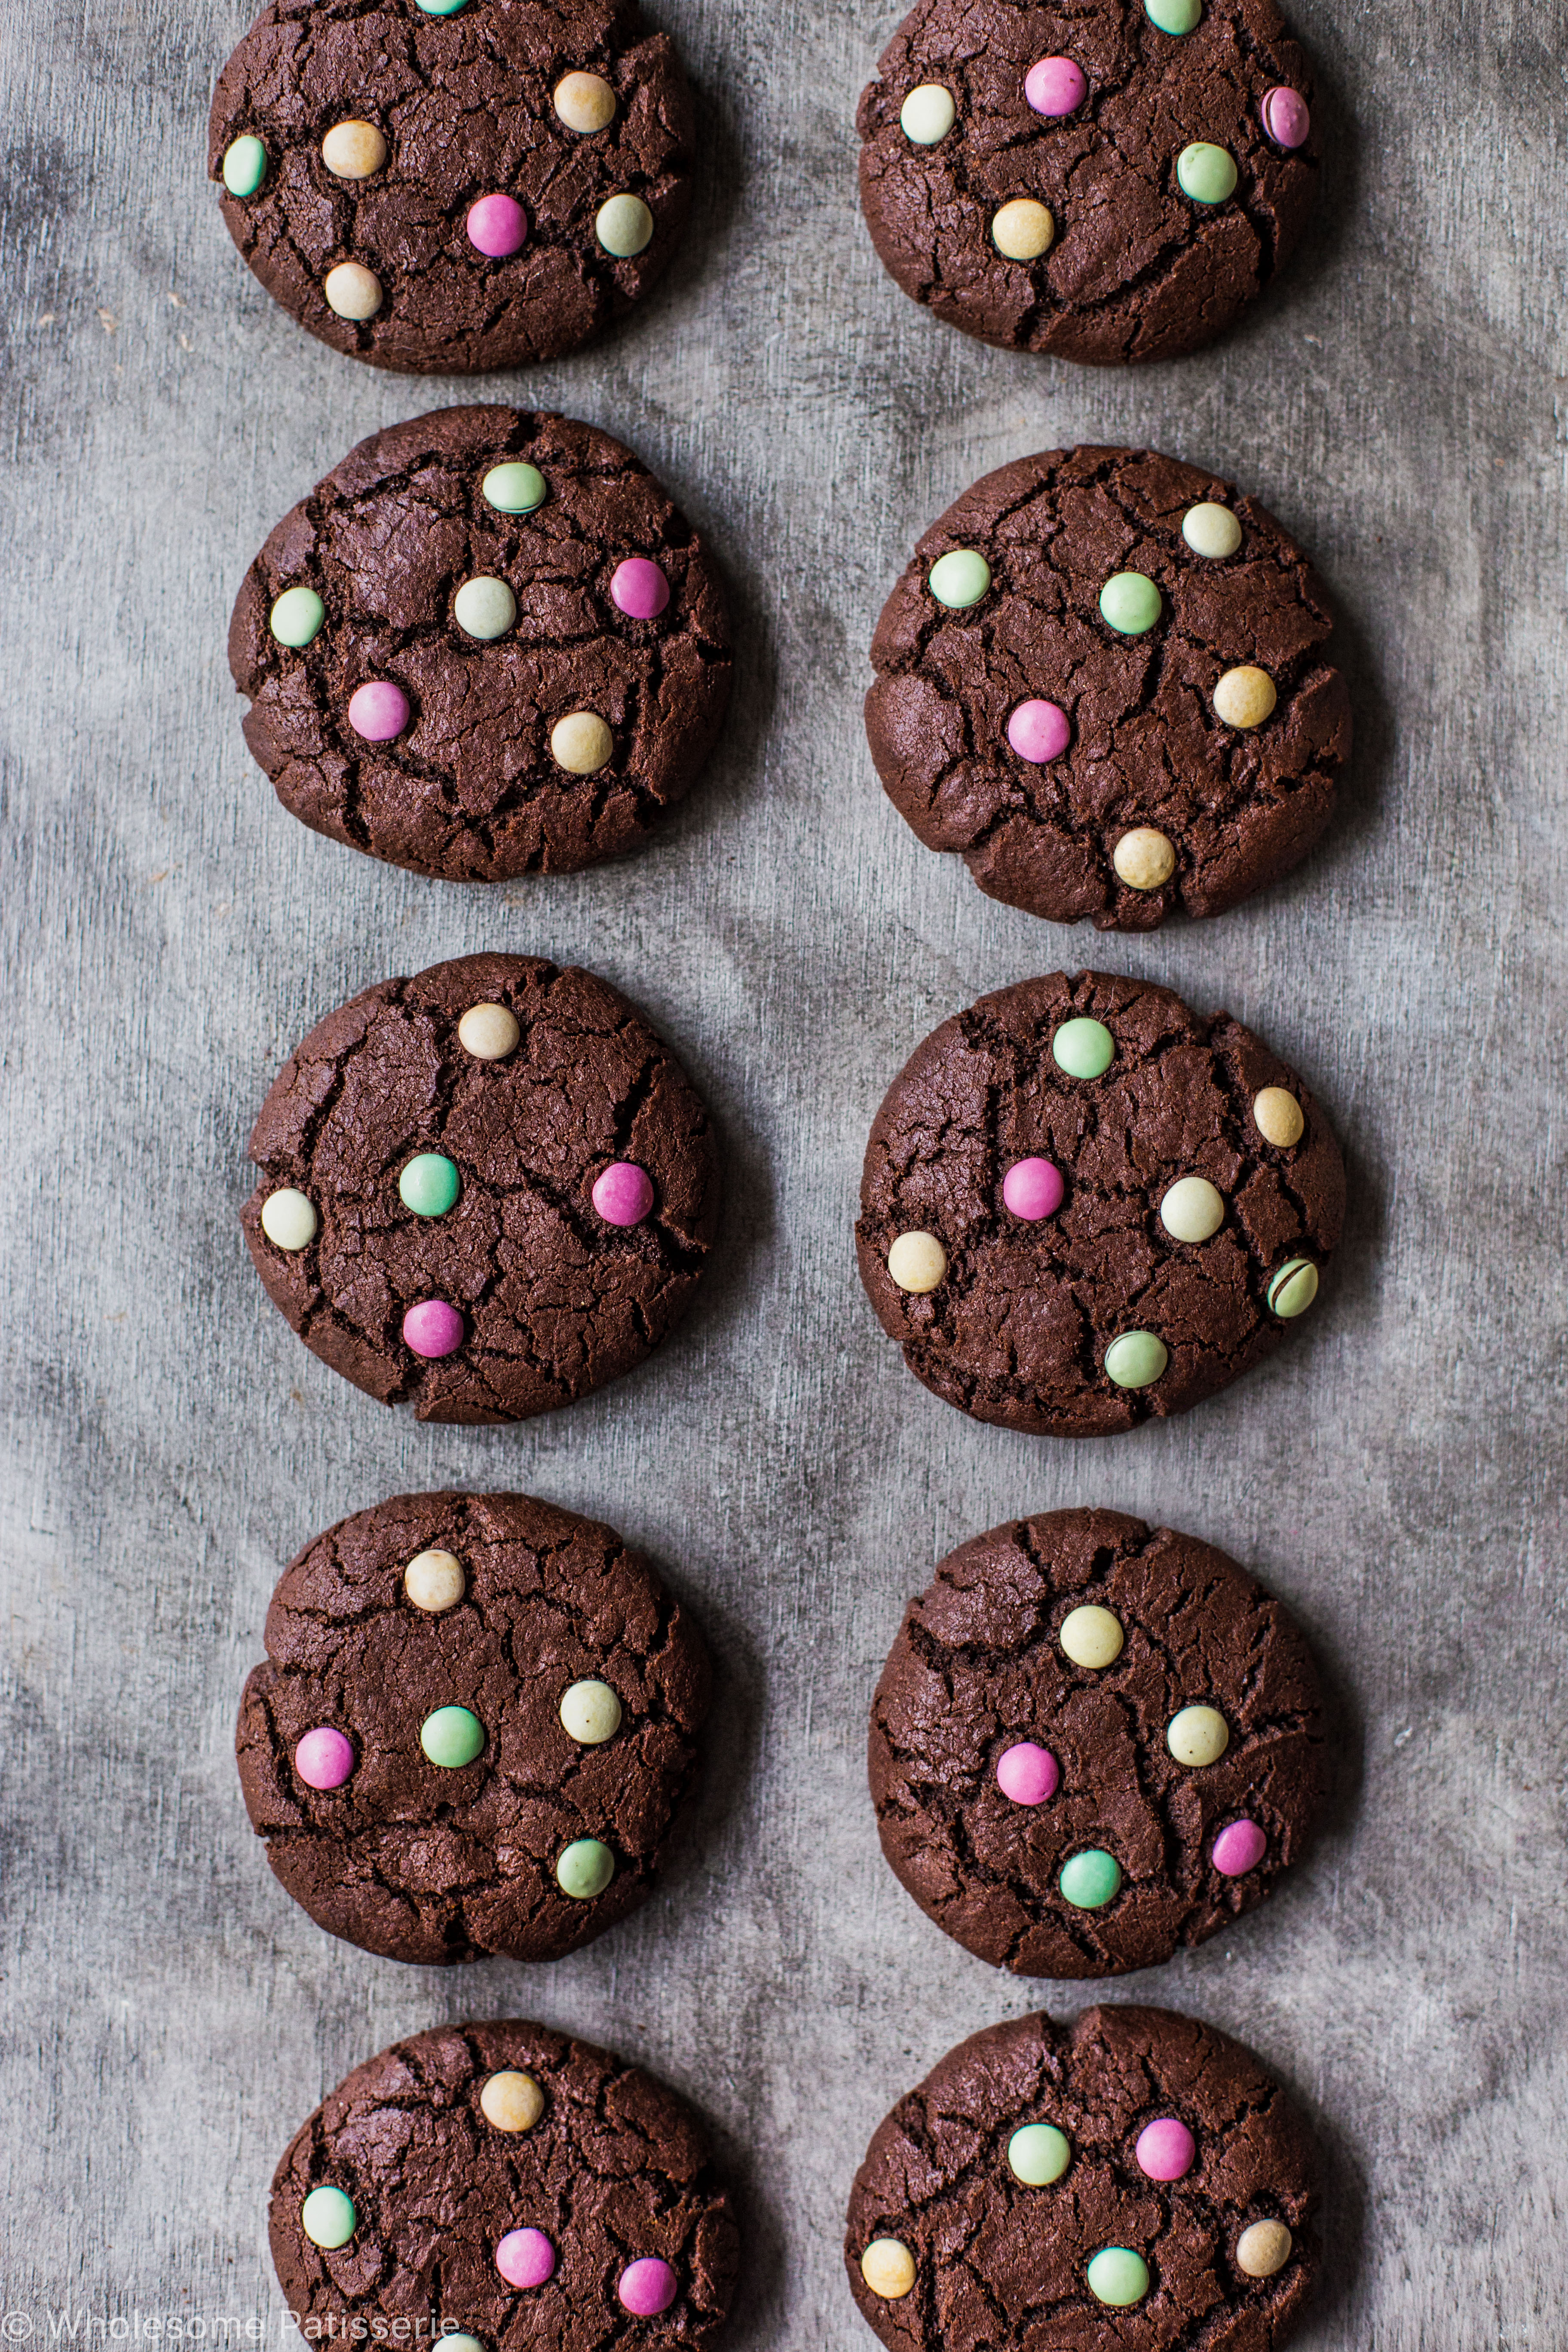 chocolate-m-&-m-cookies-gluten-free-smarties-organic-times-easy-kids-family-dutch-cocoa-delicious